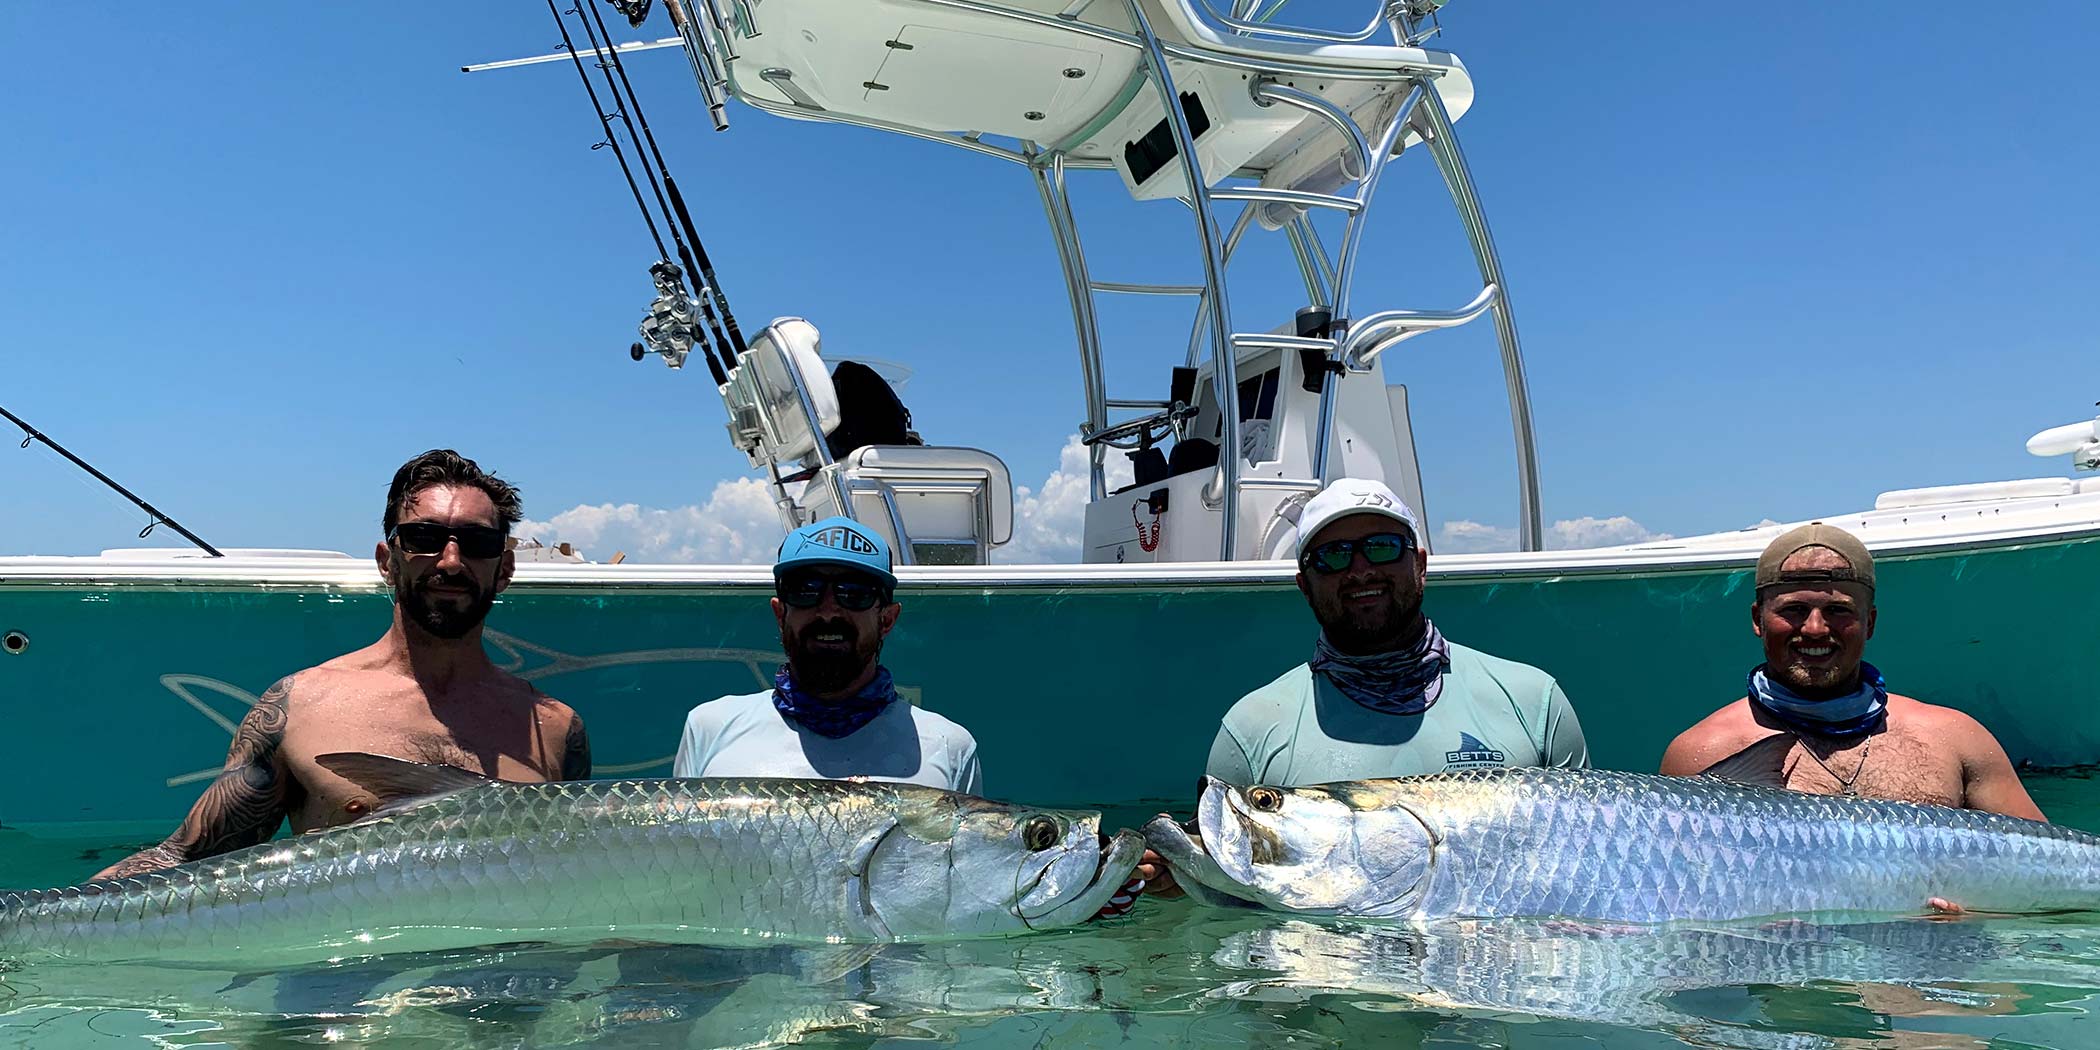 Landed a couple of monster tarpon during this charter, clients wanted to get in the water with them for the picture.